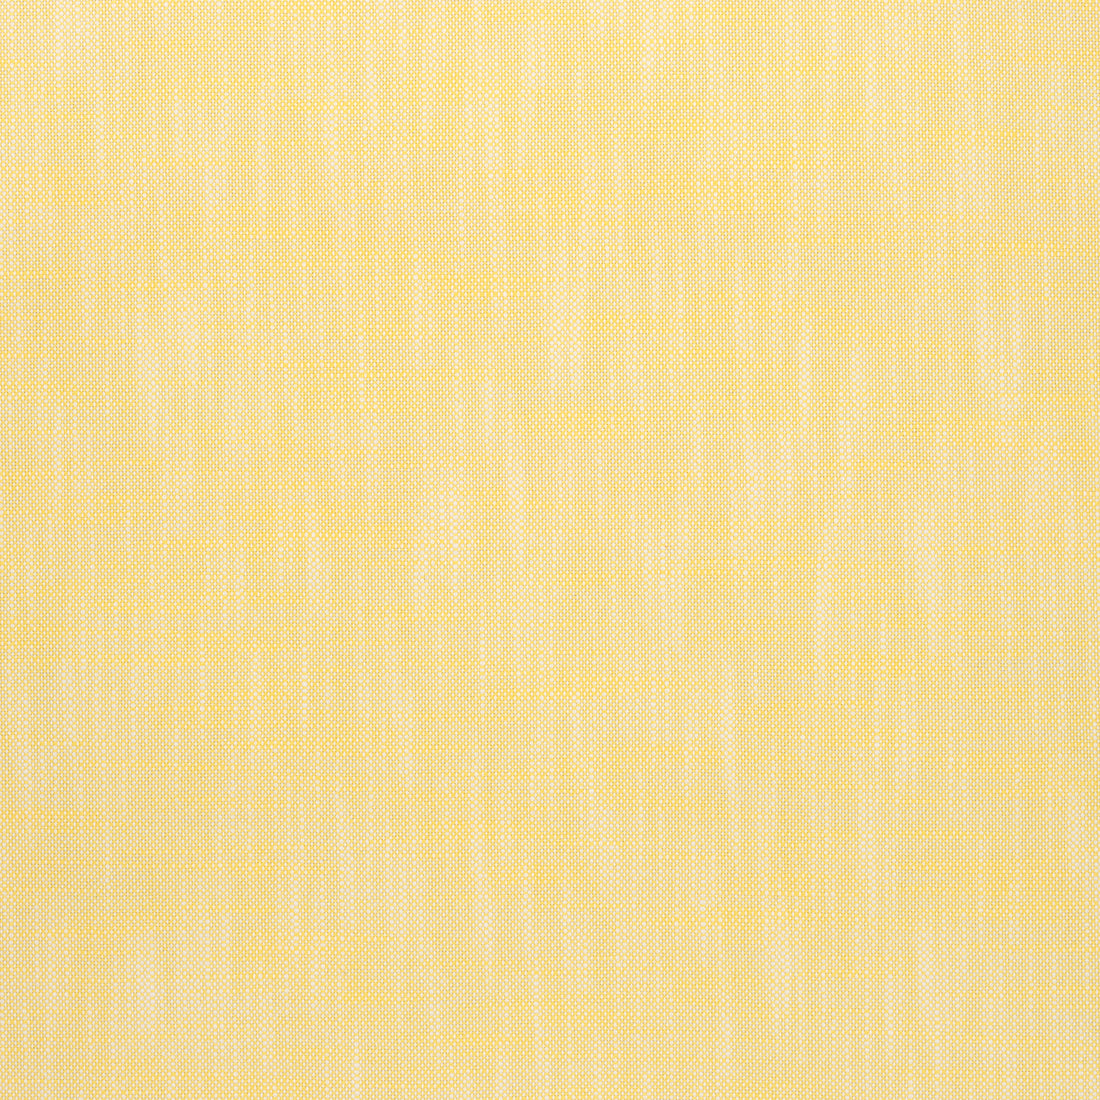 Bristol fabric in sunshine color - pattern number W73409 - by Thibaut in the Landmark Textures collection